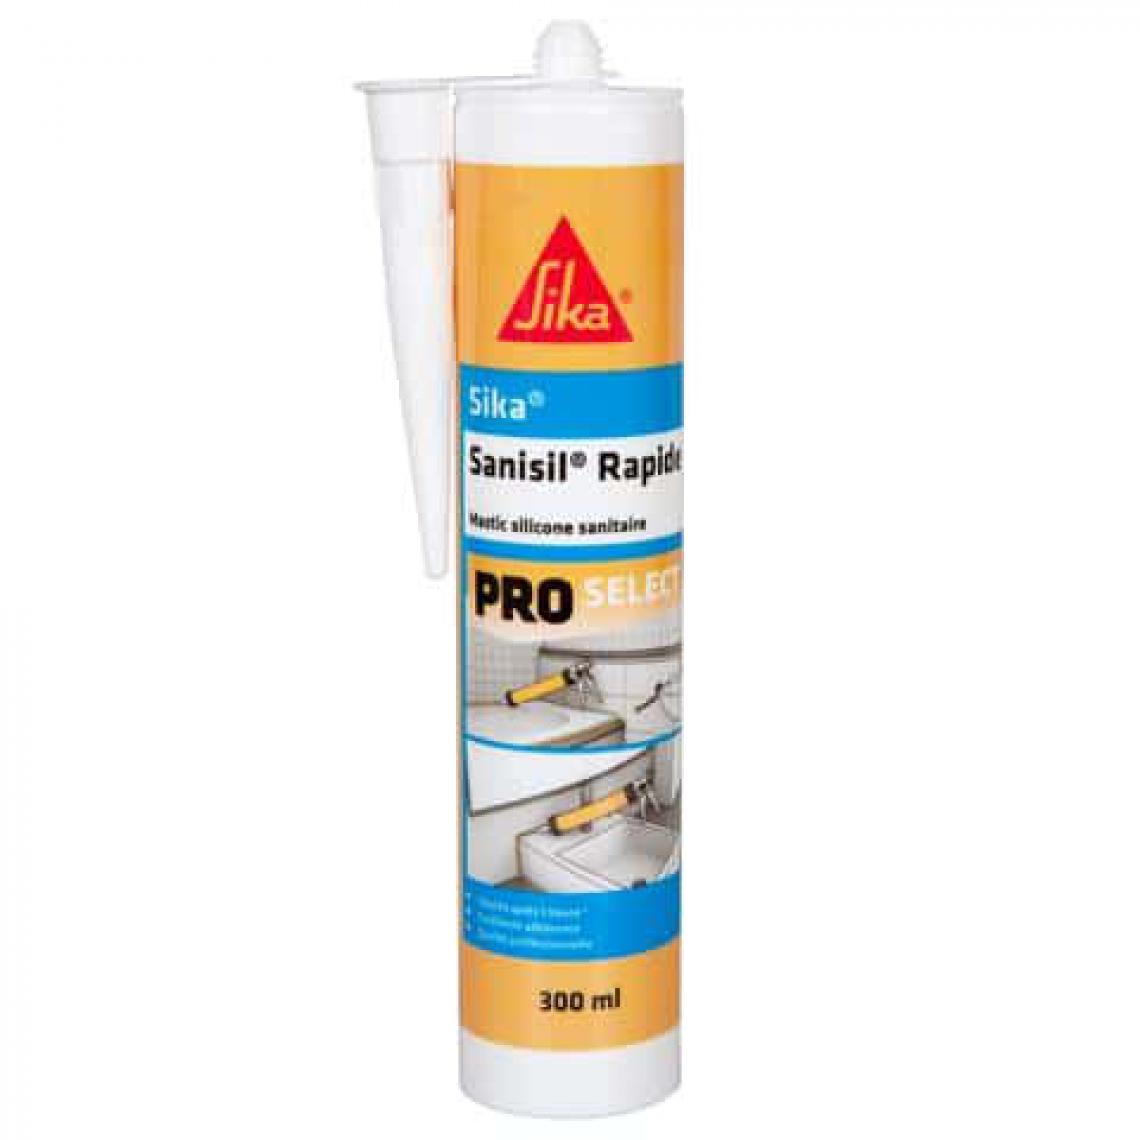 Sika - Mastic silicone anti-moisissures spécial sanitaire - SIKA Sanisil Rapide - Blanc - 300ml - Mastic, silicone, joint